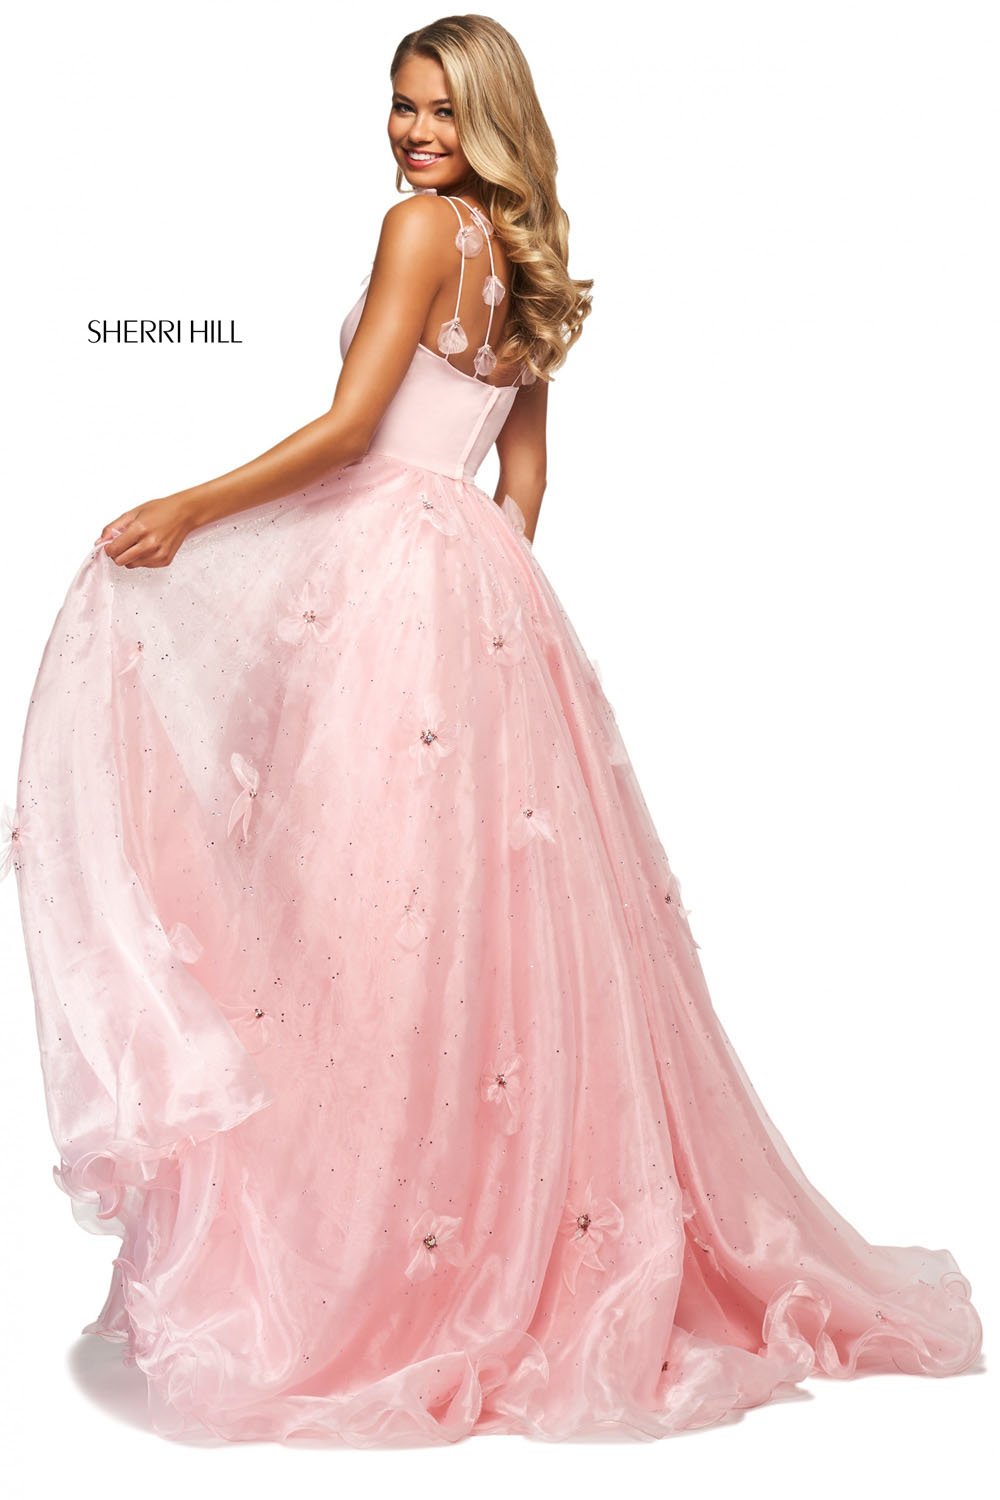 Sherri Hill 53823 dress images in these colors: Ivory, Blush, Light Blue, Lilac, Candy Pink, Yellow, Aqua.